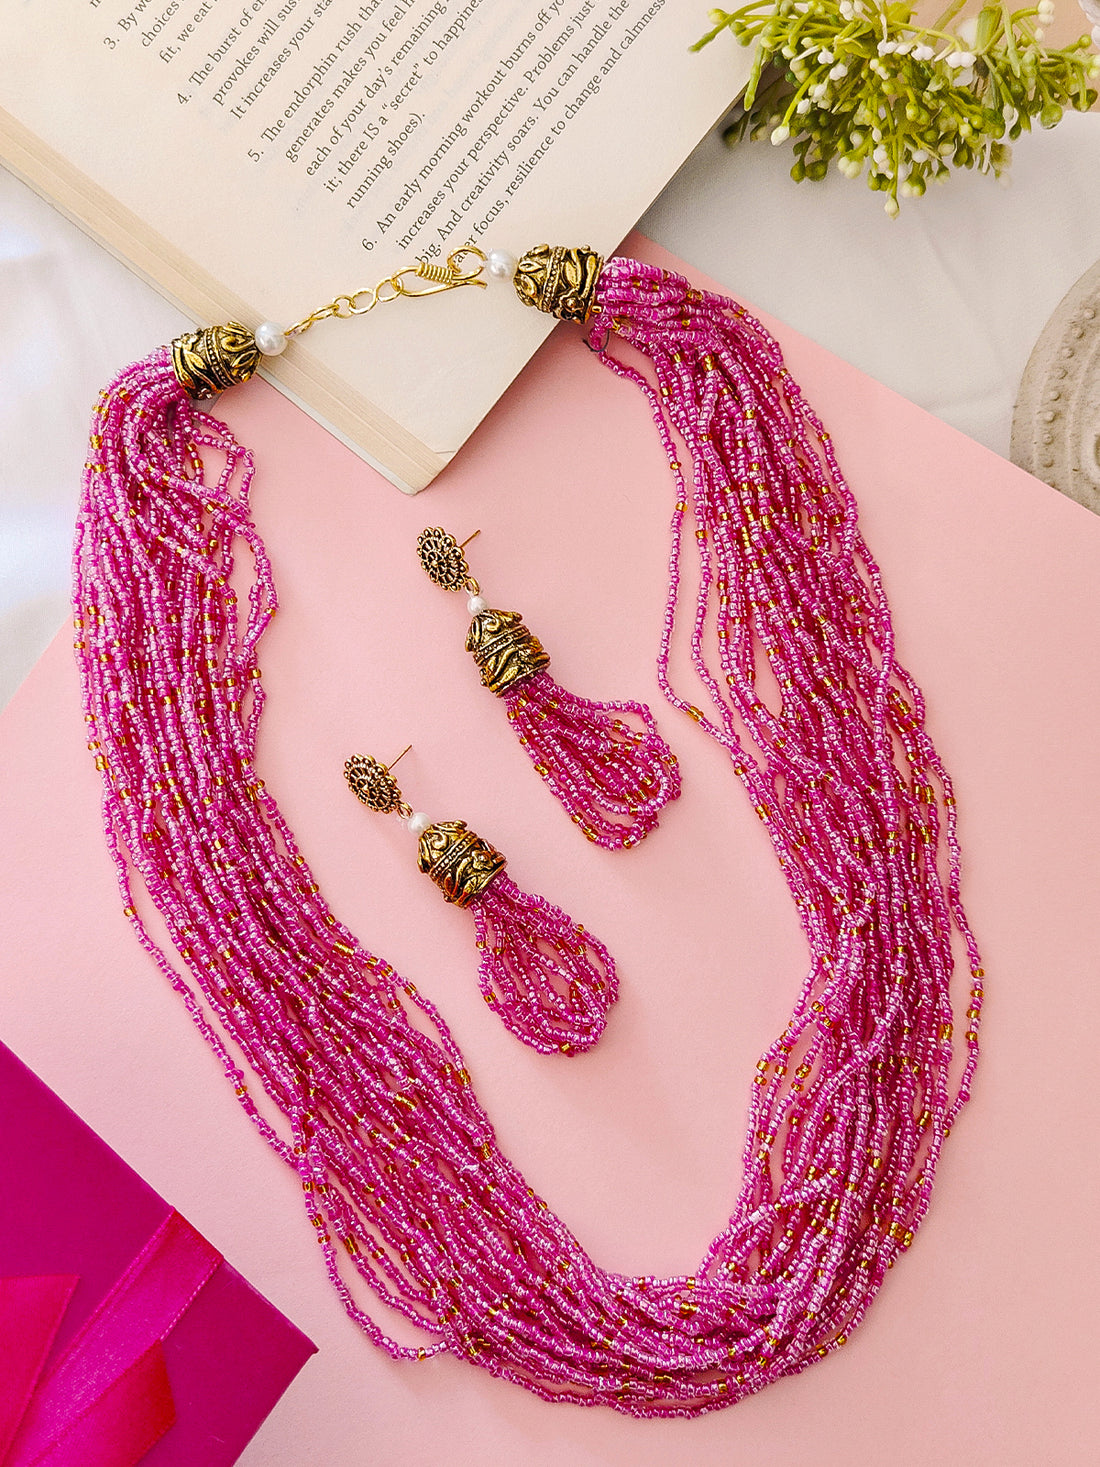 Moti Jhalar Necklace Set | Pink-colour Beads Necklace & Earrings for Parties & Office Going Women from House of Mrigaya by Nandini-Pink - Mrigaya India